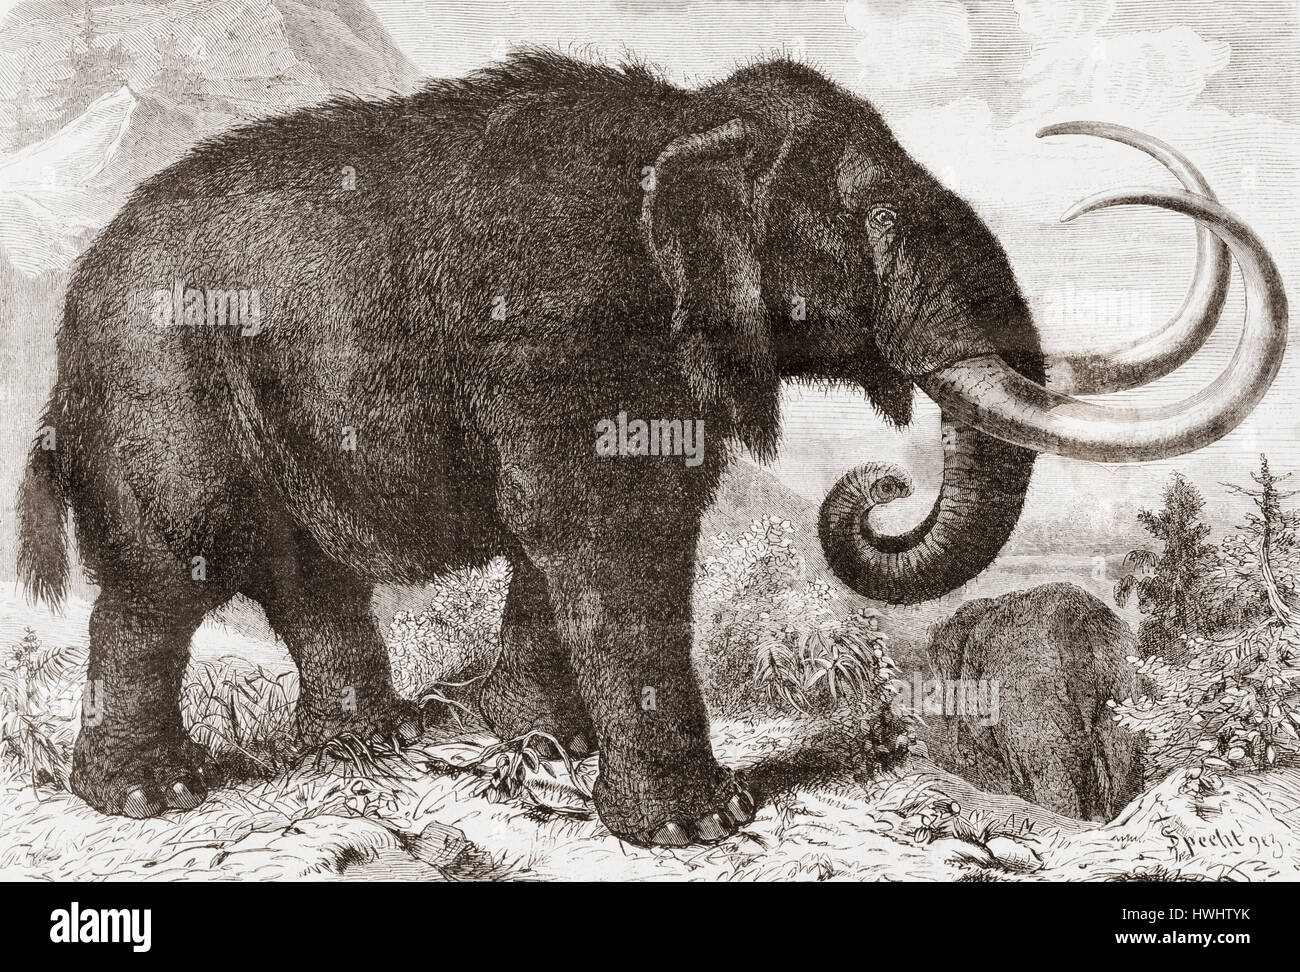 Artist's reconstruction of a woolly mammoth (Mammuthus primigenius).   From L'Univers Illustre published 1867. Stock Photo